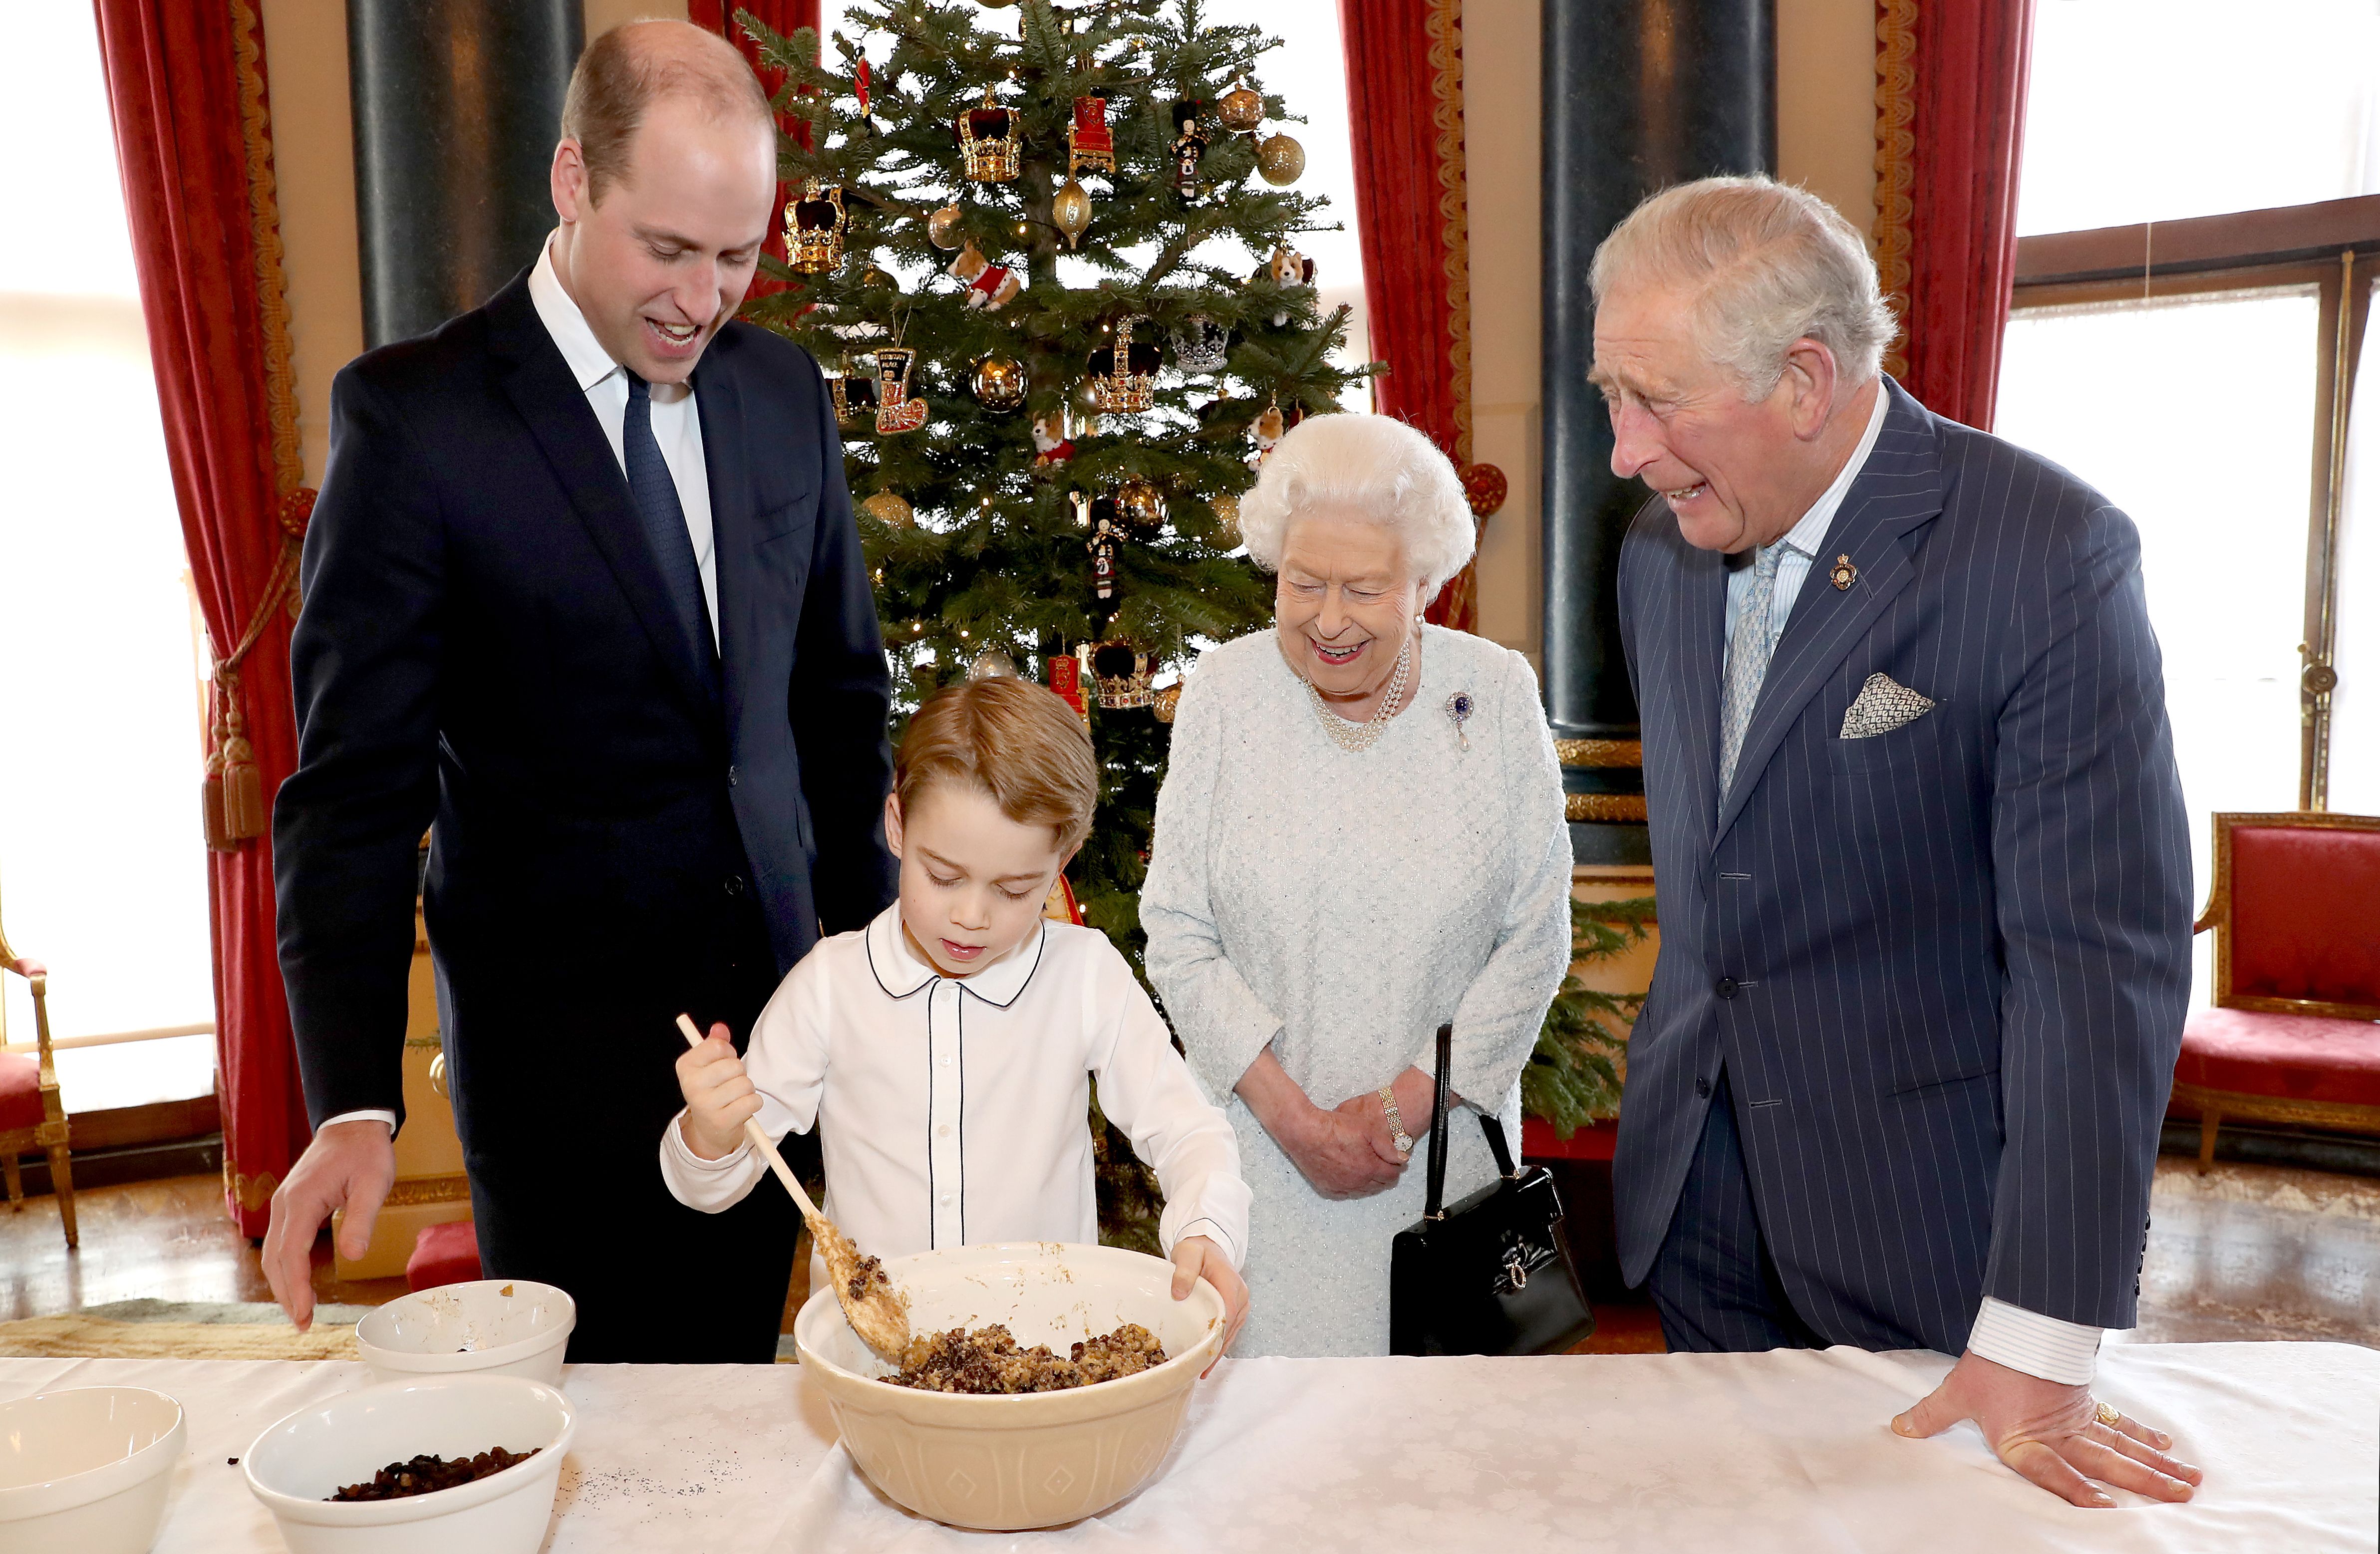 Queen Elizabeth II, Prince Charles, Prince William, and Prince George in December 2019 preparing special Christmas puddings in the Music Room at Buckingham Palace, London. | Photo: Getty Images